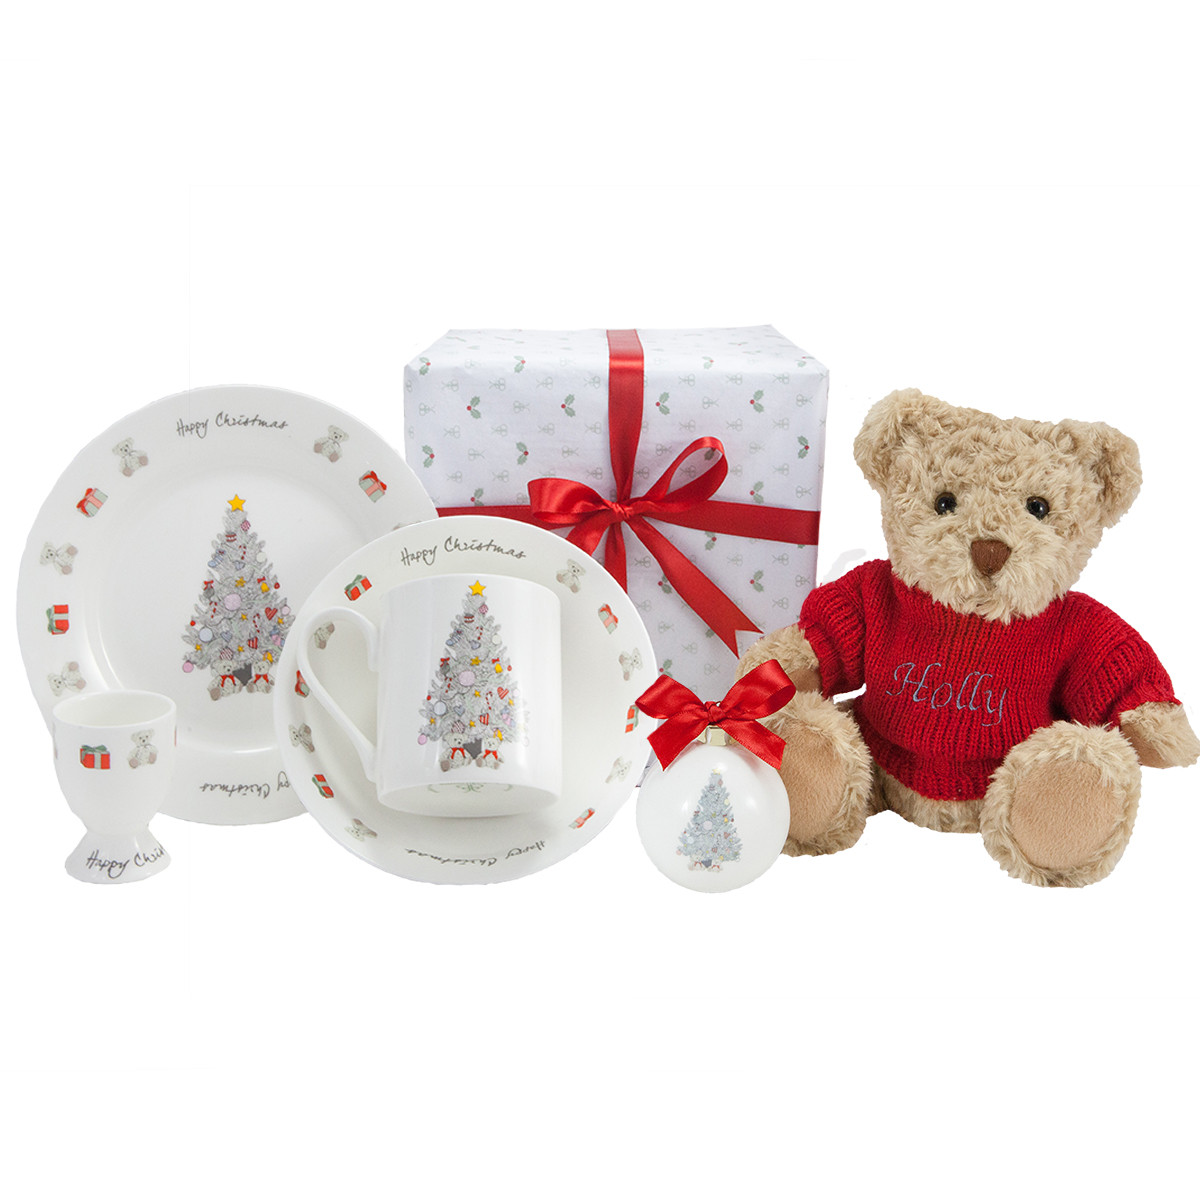 Christmas Gift Ideas From Baby
 Baby s First Christmas Gift Ideas The Syders